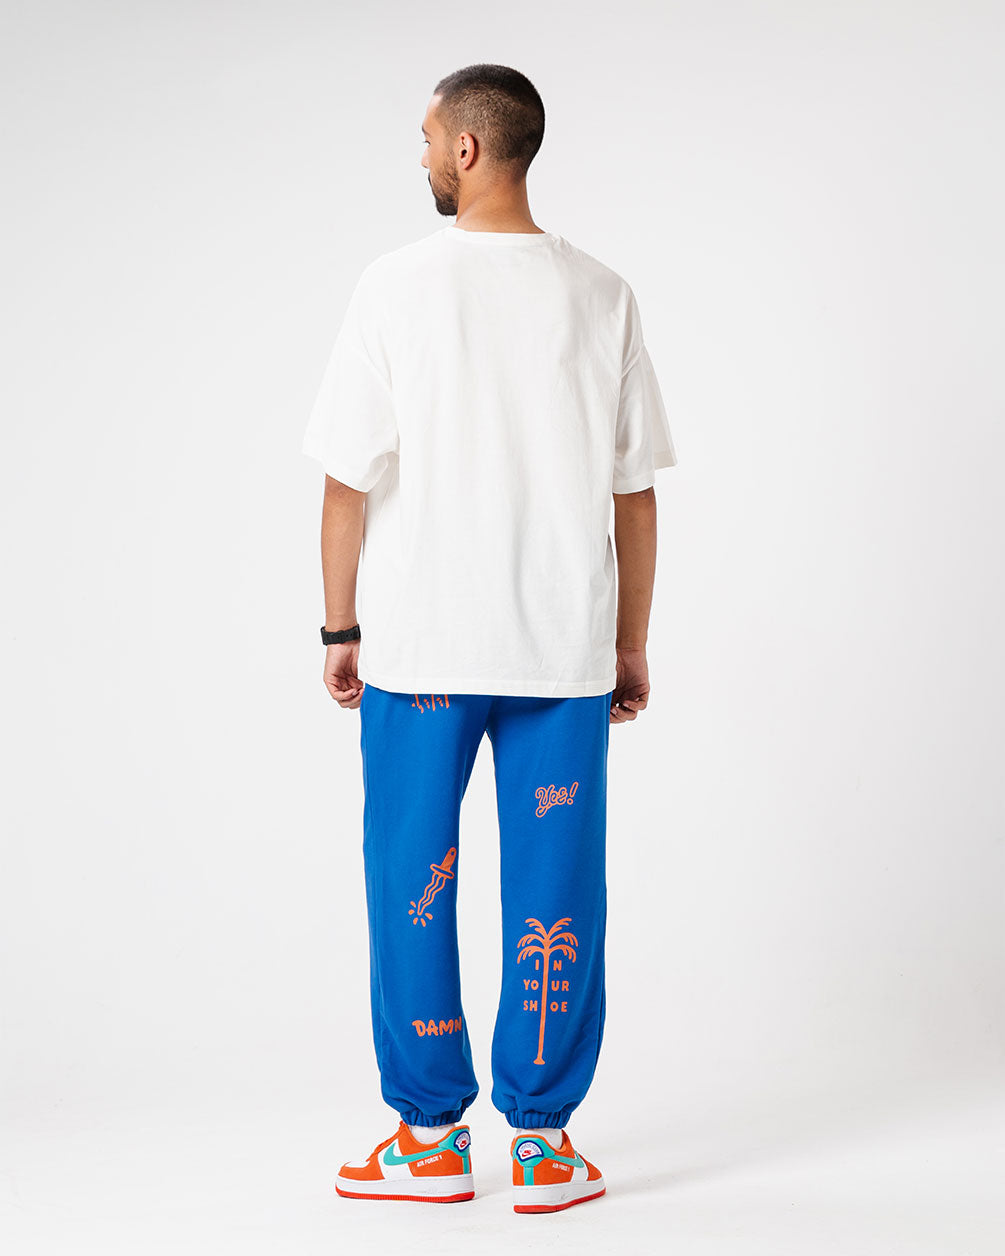 Blue Printed Swants (Sweatpants) Swants IN YOUR SHOE XL 